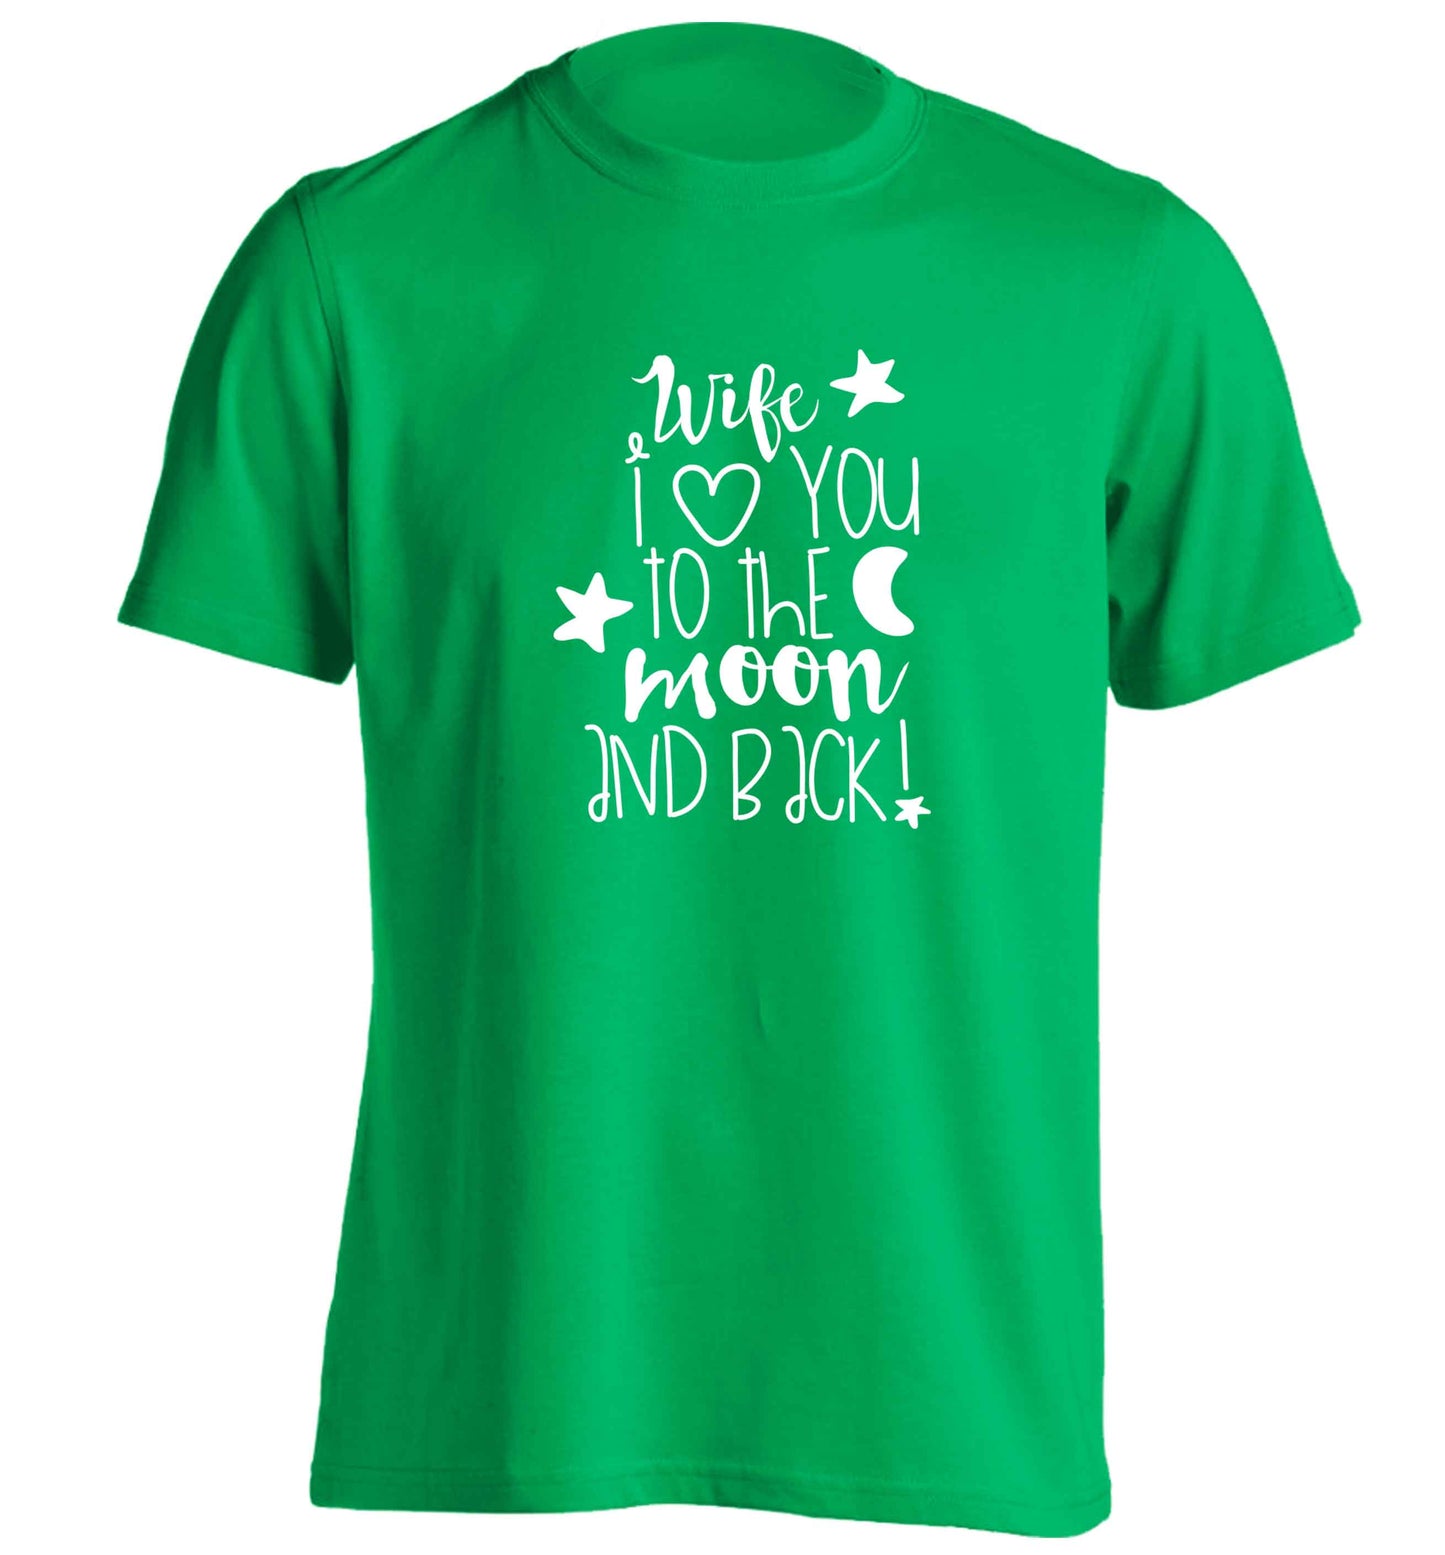 Wife I love you to the moon and back adults unisex green Tshirt 2XL